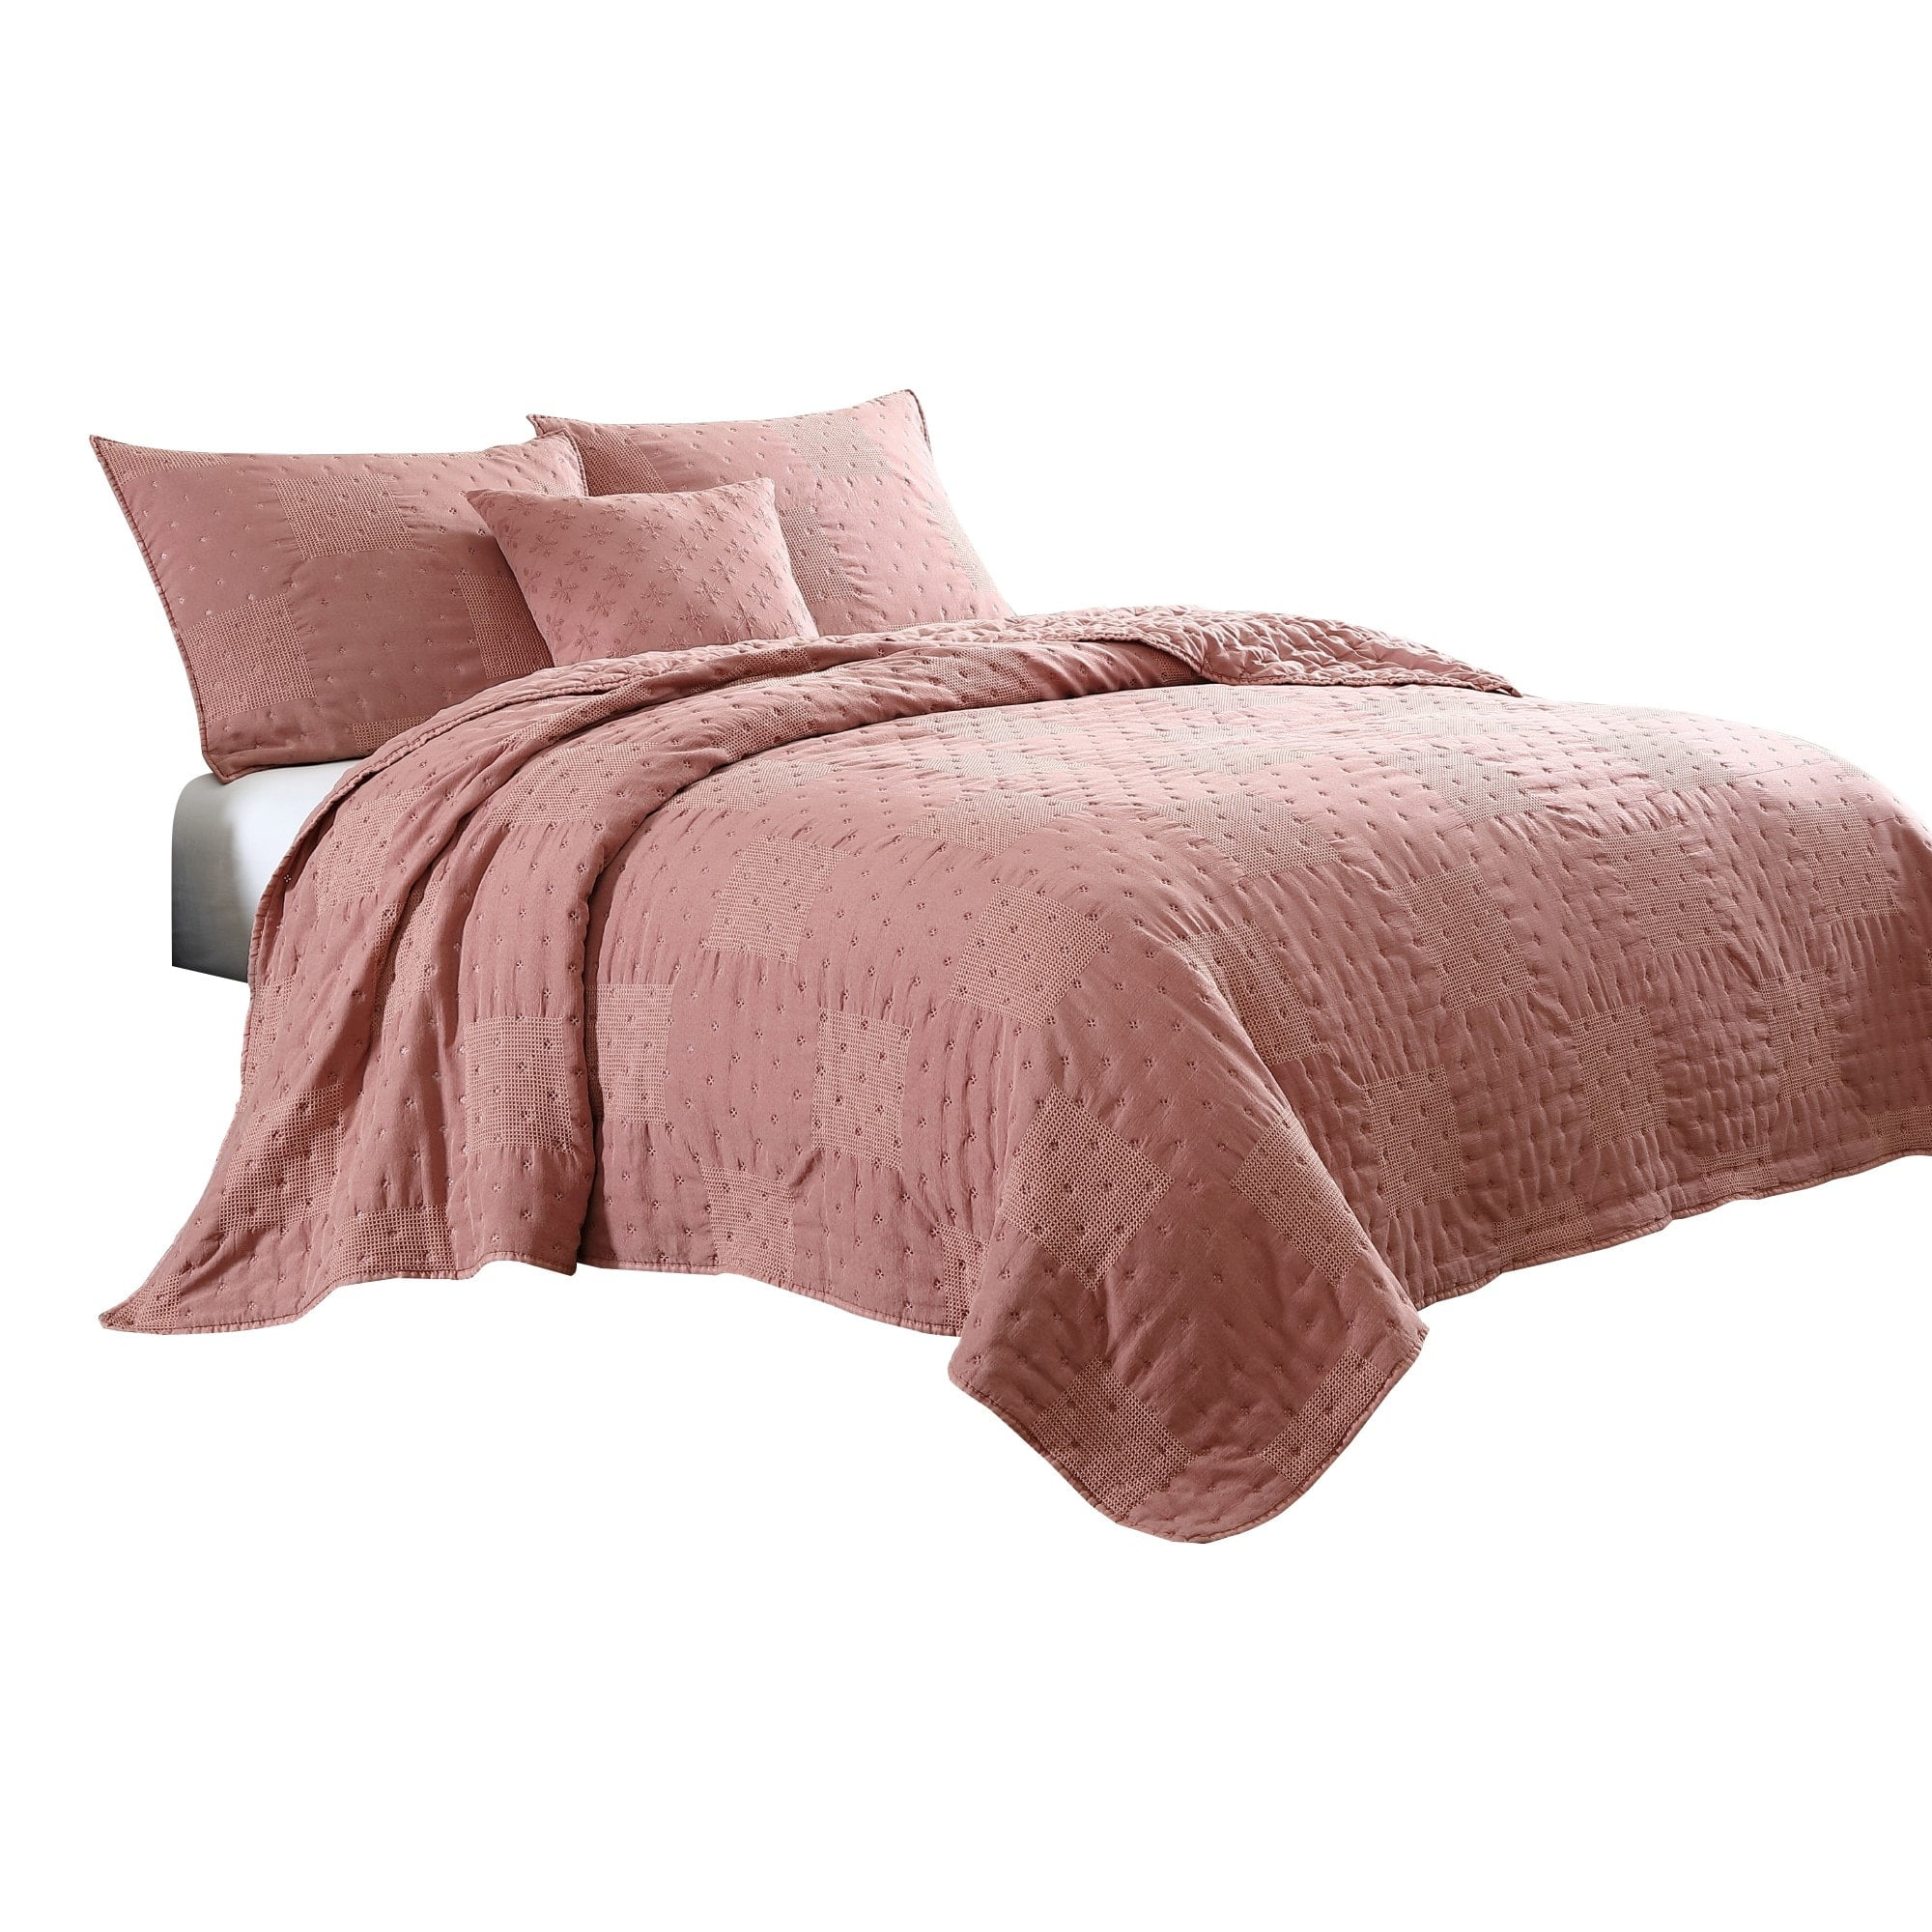 Picture of Benjara BM250015 Veria King Size Quilt Set with Polka Dots, Pink - 4 Piece